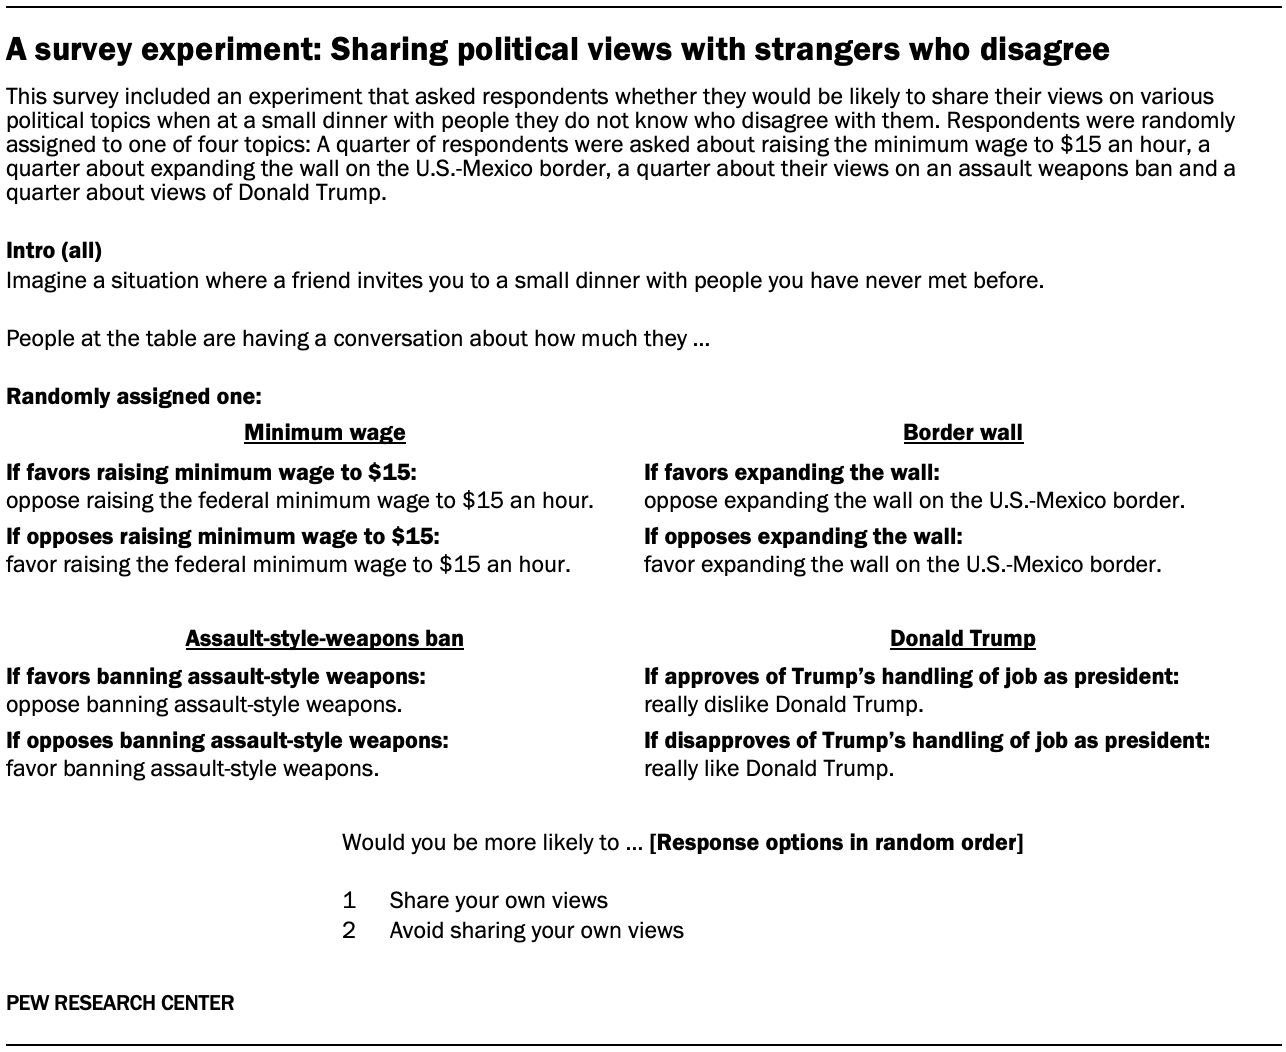 A survey experiment: Sharing political views with strangers who disagree